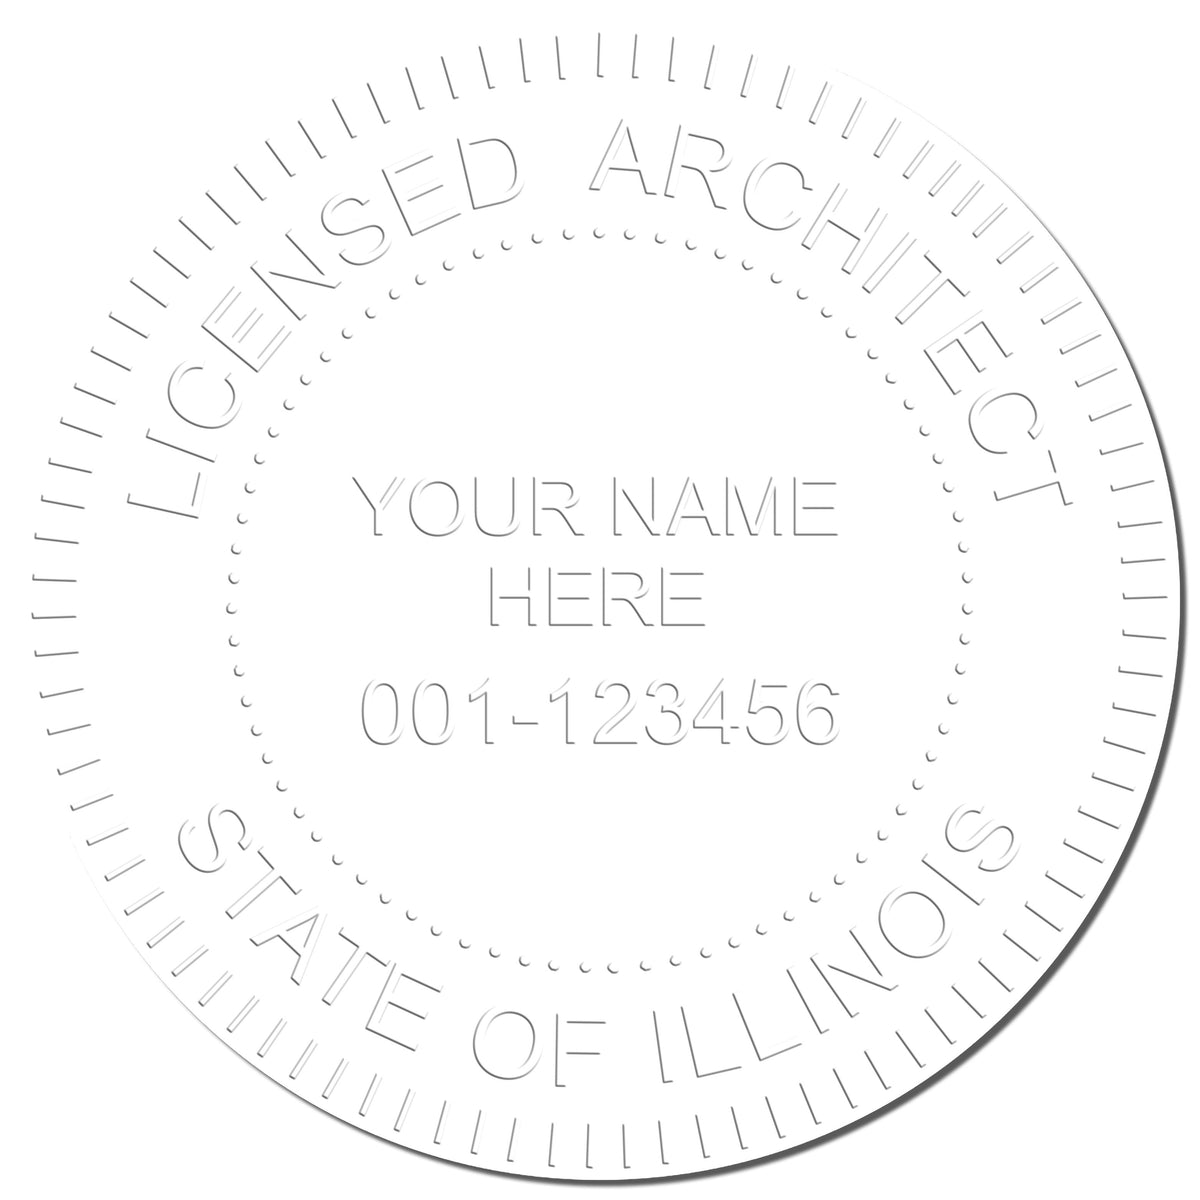 A stamped impression of the State of Illinois Long Reach Architectural Embossing Seal in this stylish lifestyle photo, setting the tone for a unique and personalized product.